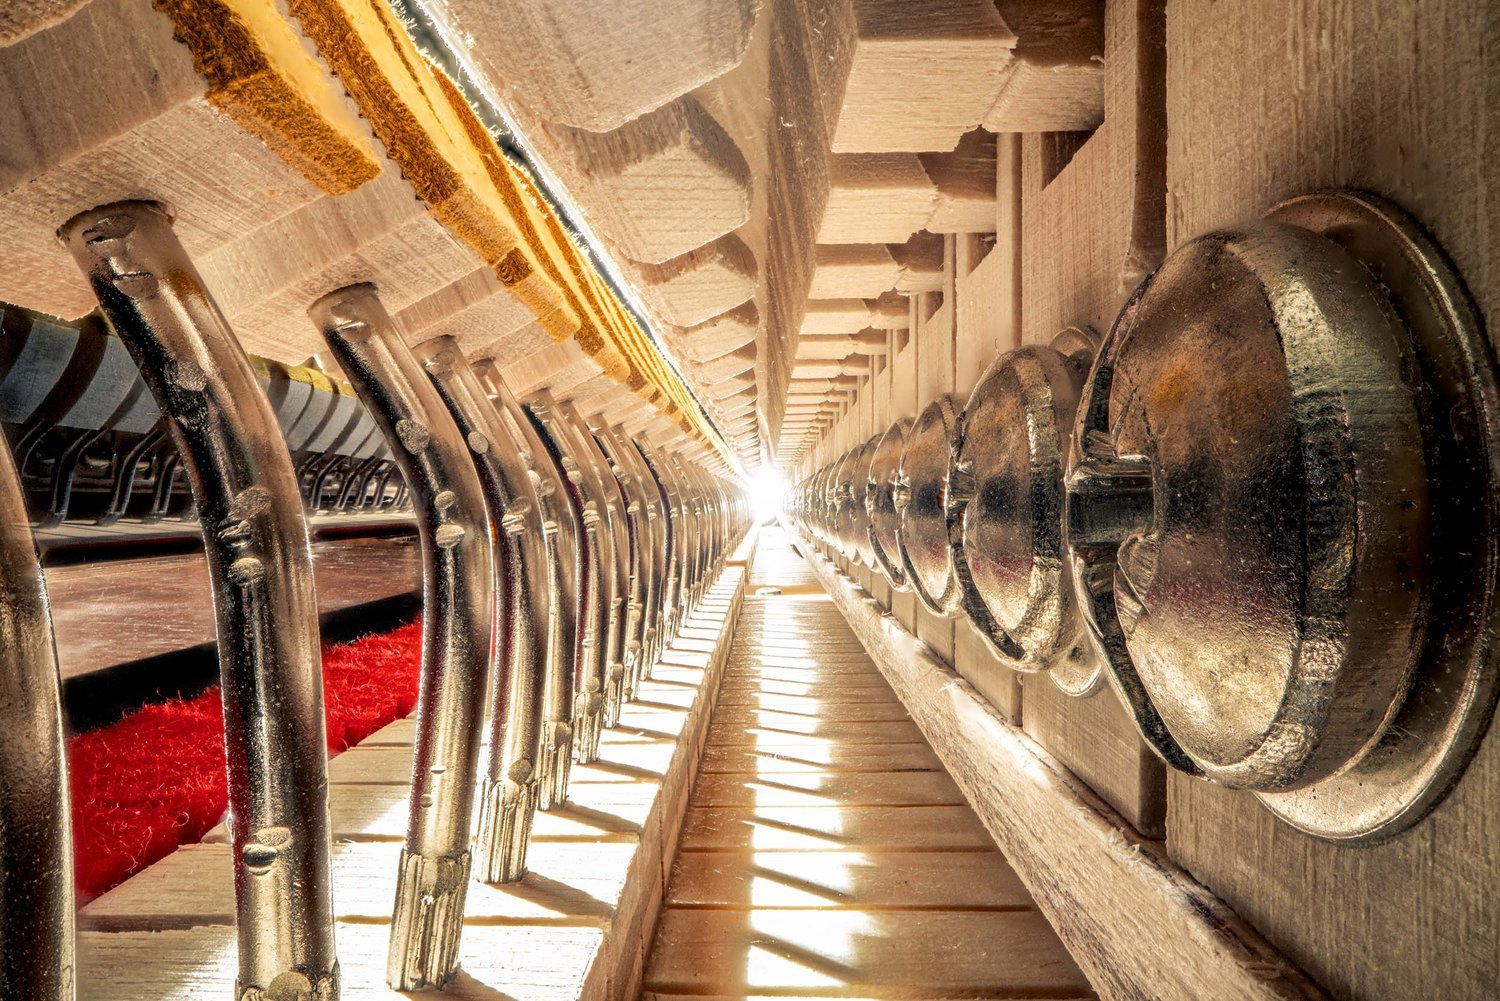 The inside of a musical instrument